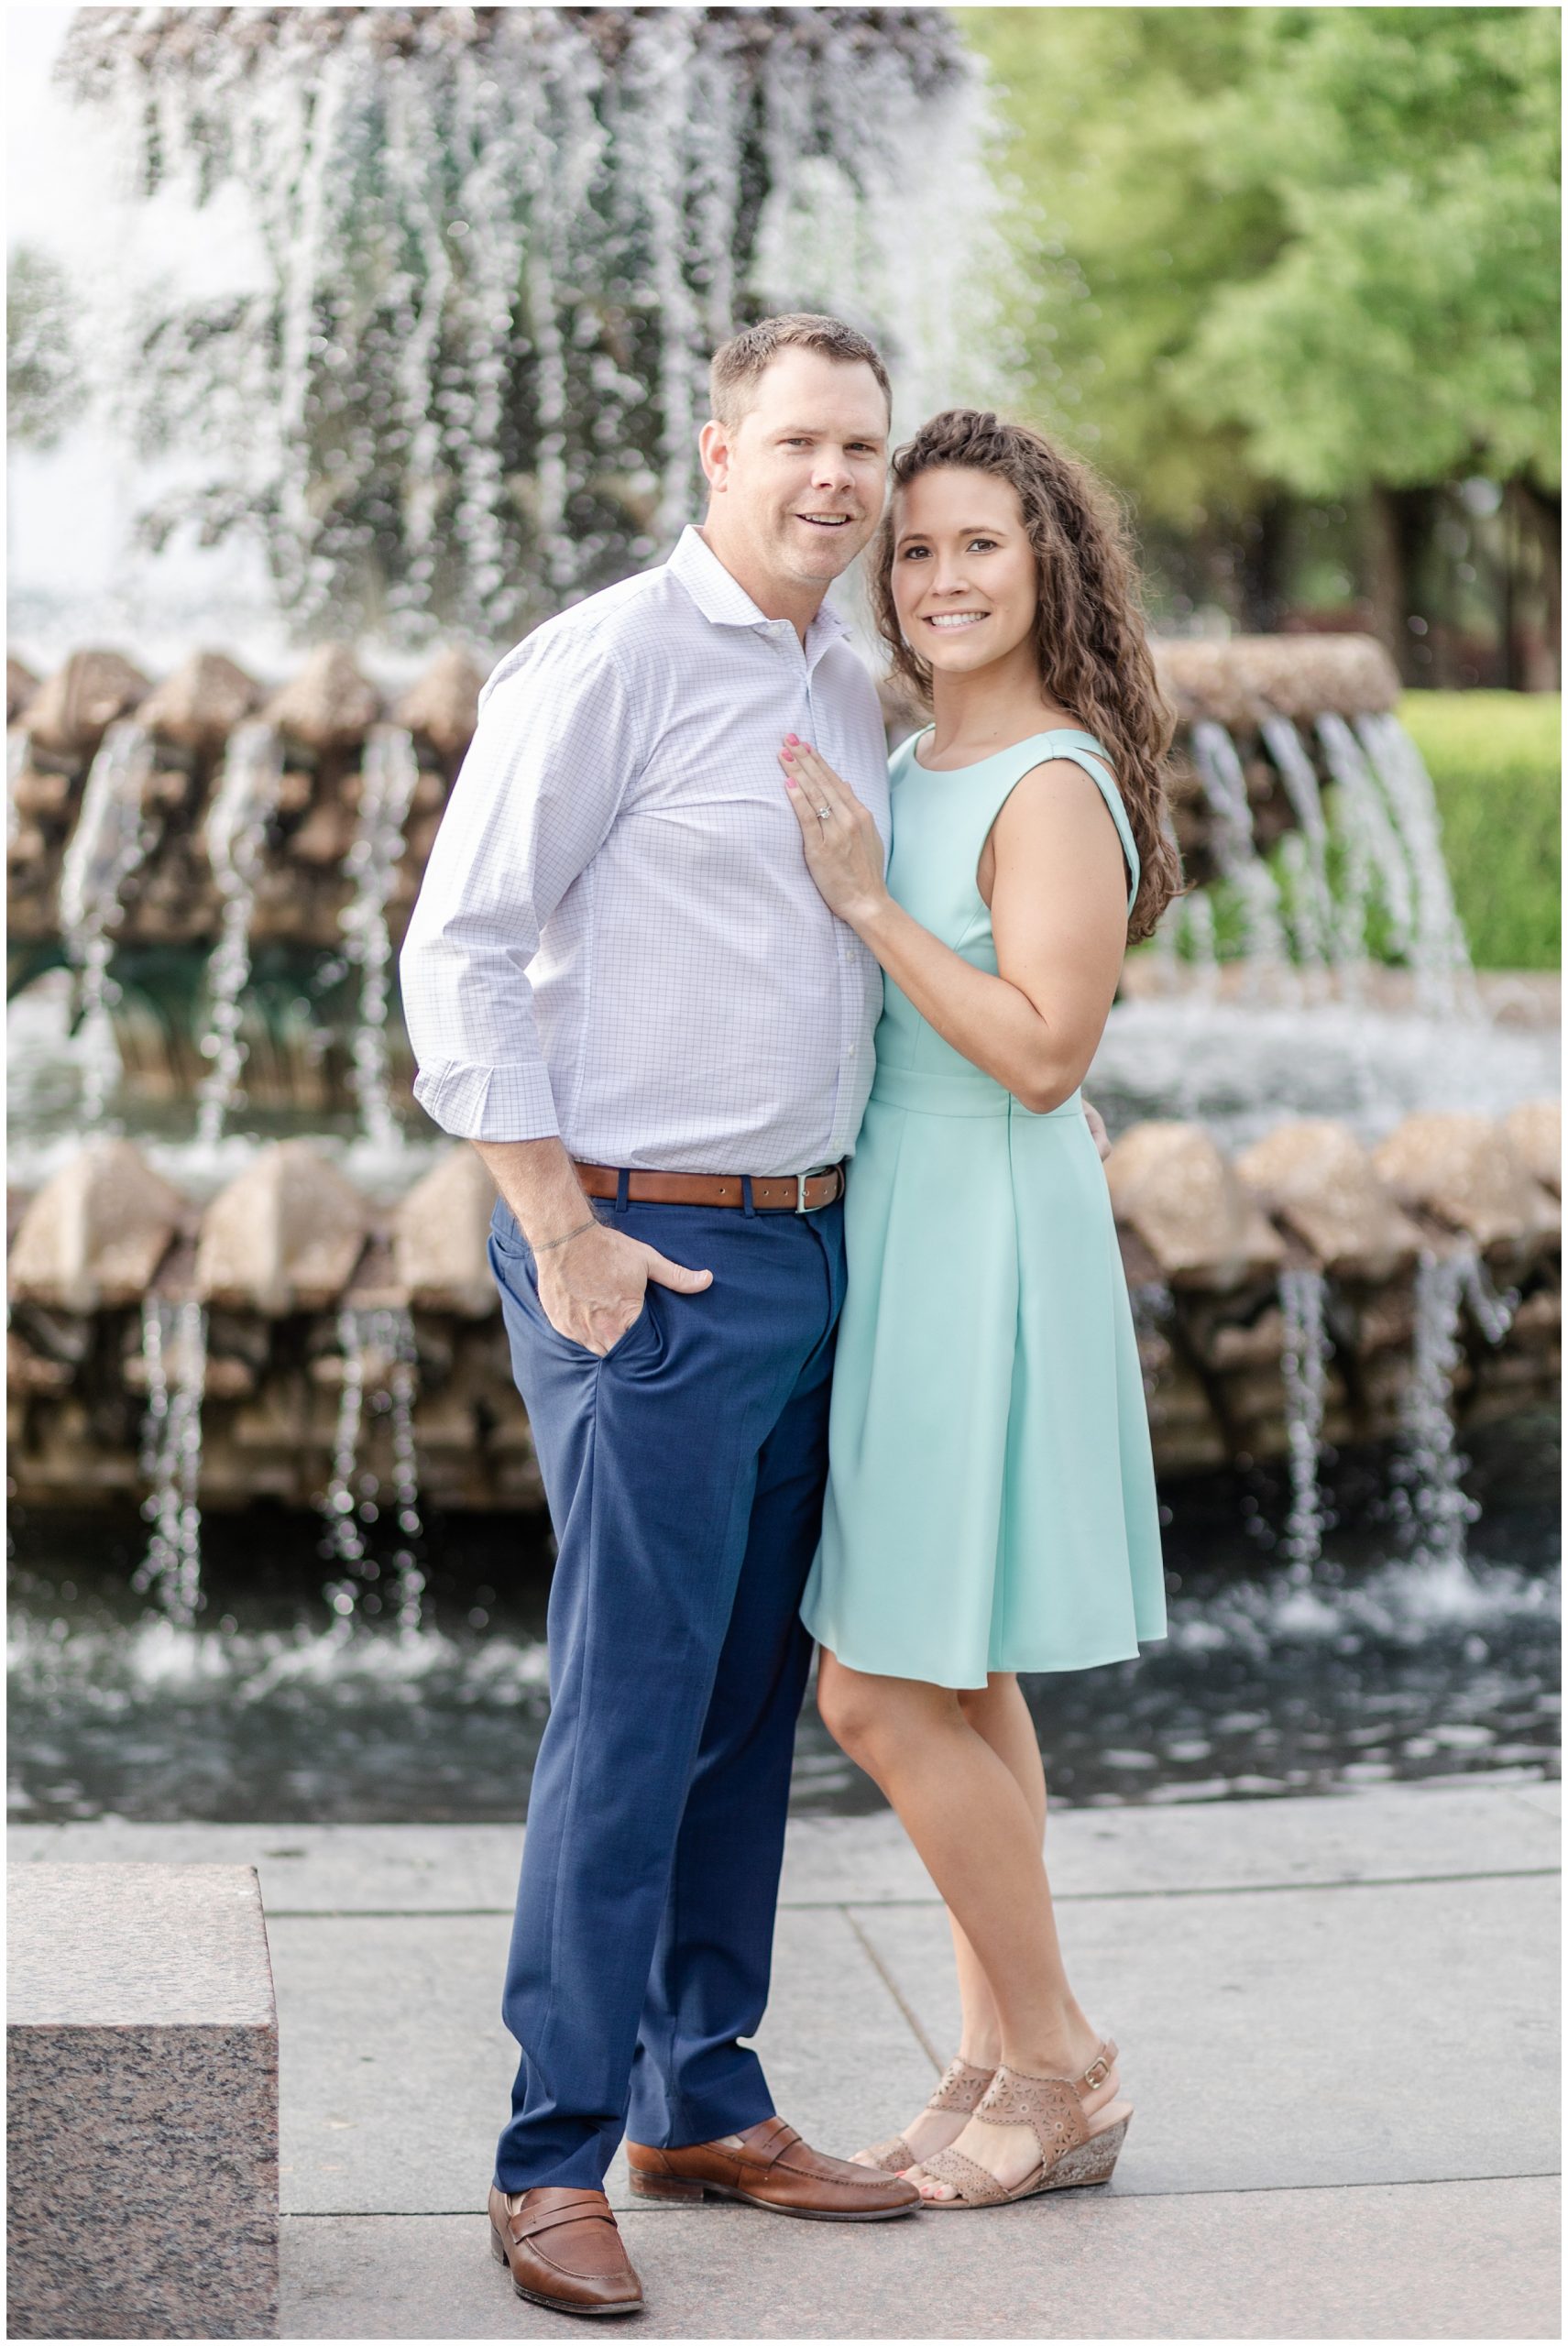 Pineapple Fountain Engagement Session